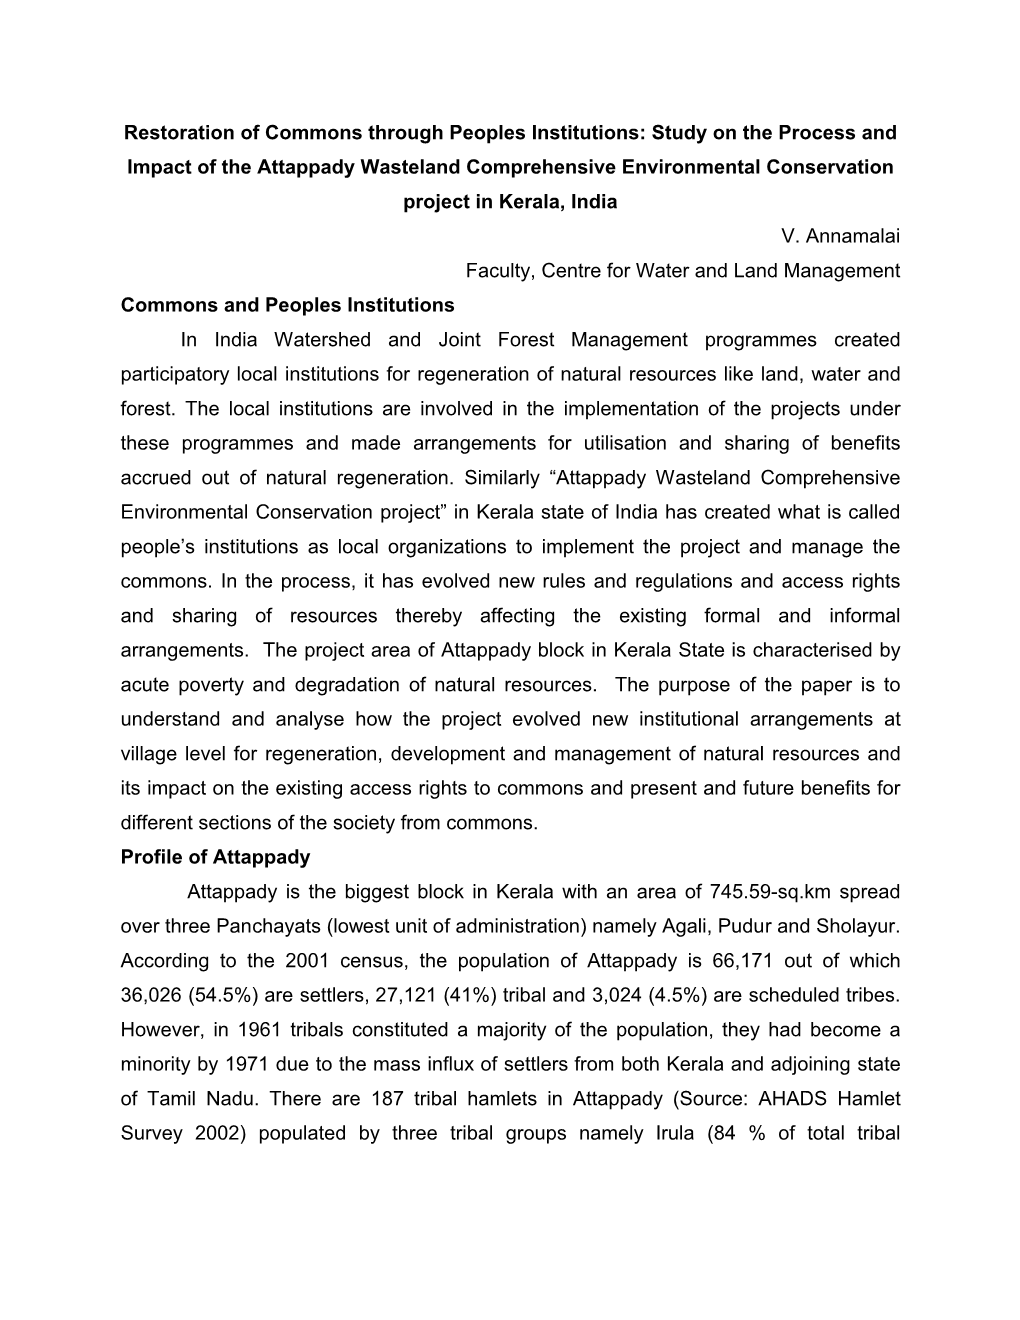 Study on the Process and Impact of the Attappady Wasteland Comprehensive Environmental Conservation Project in Kerala, India V